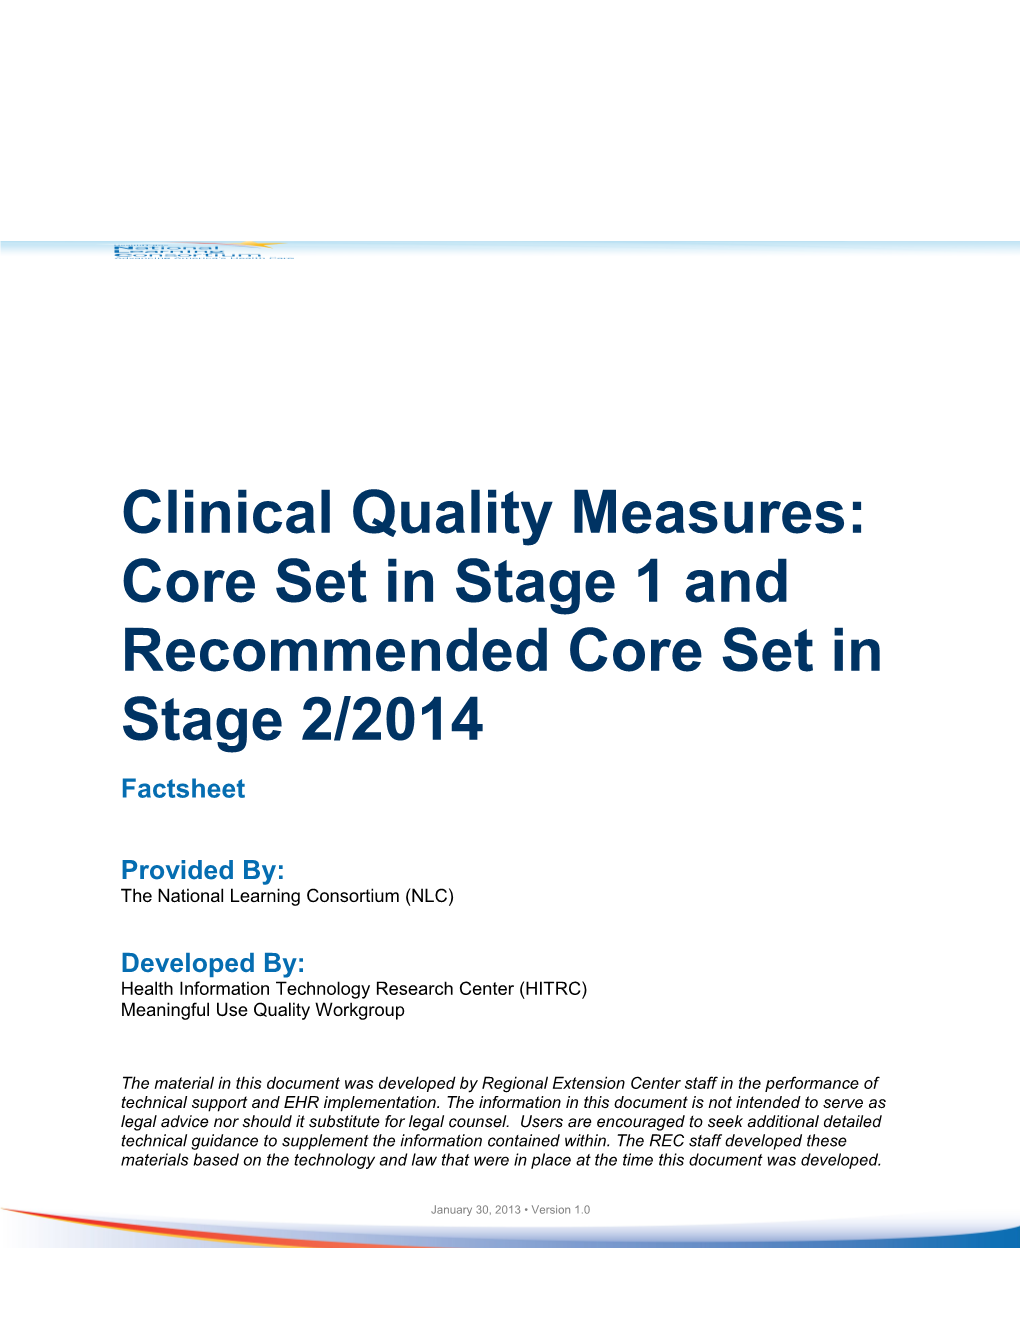 Clinical Quality Measures: Core Set in Stage 1 and Recommended Core Set in Stage 2/2014